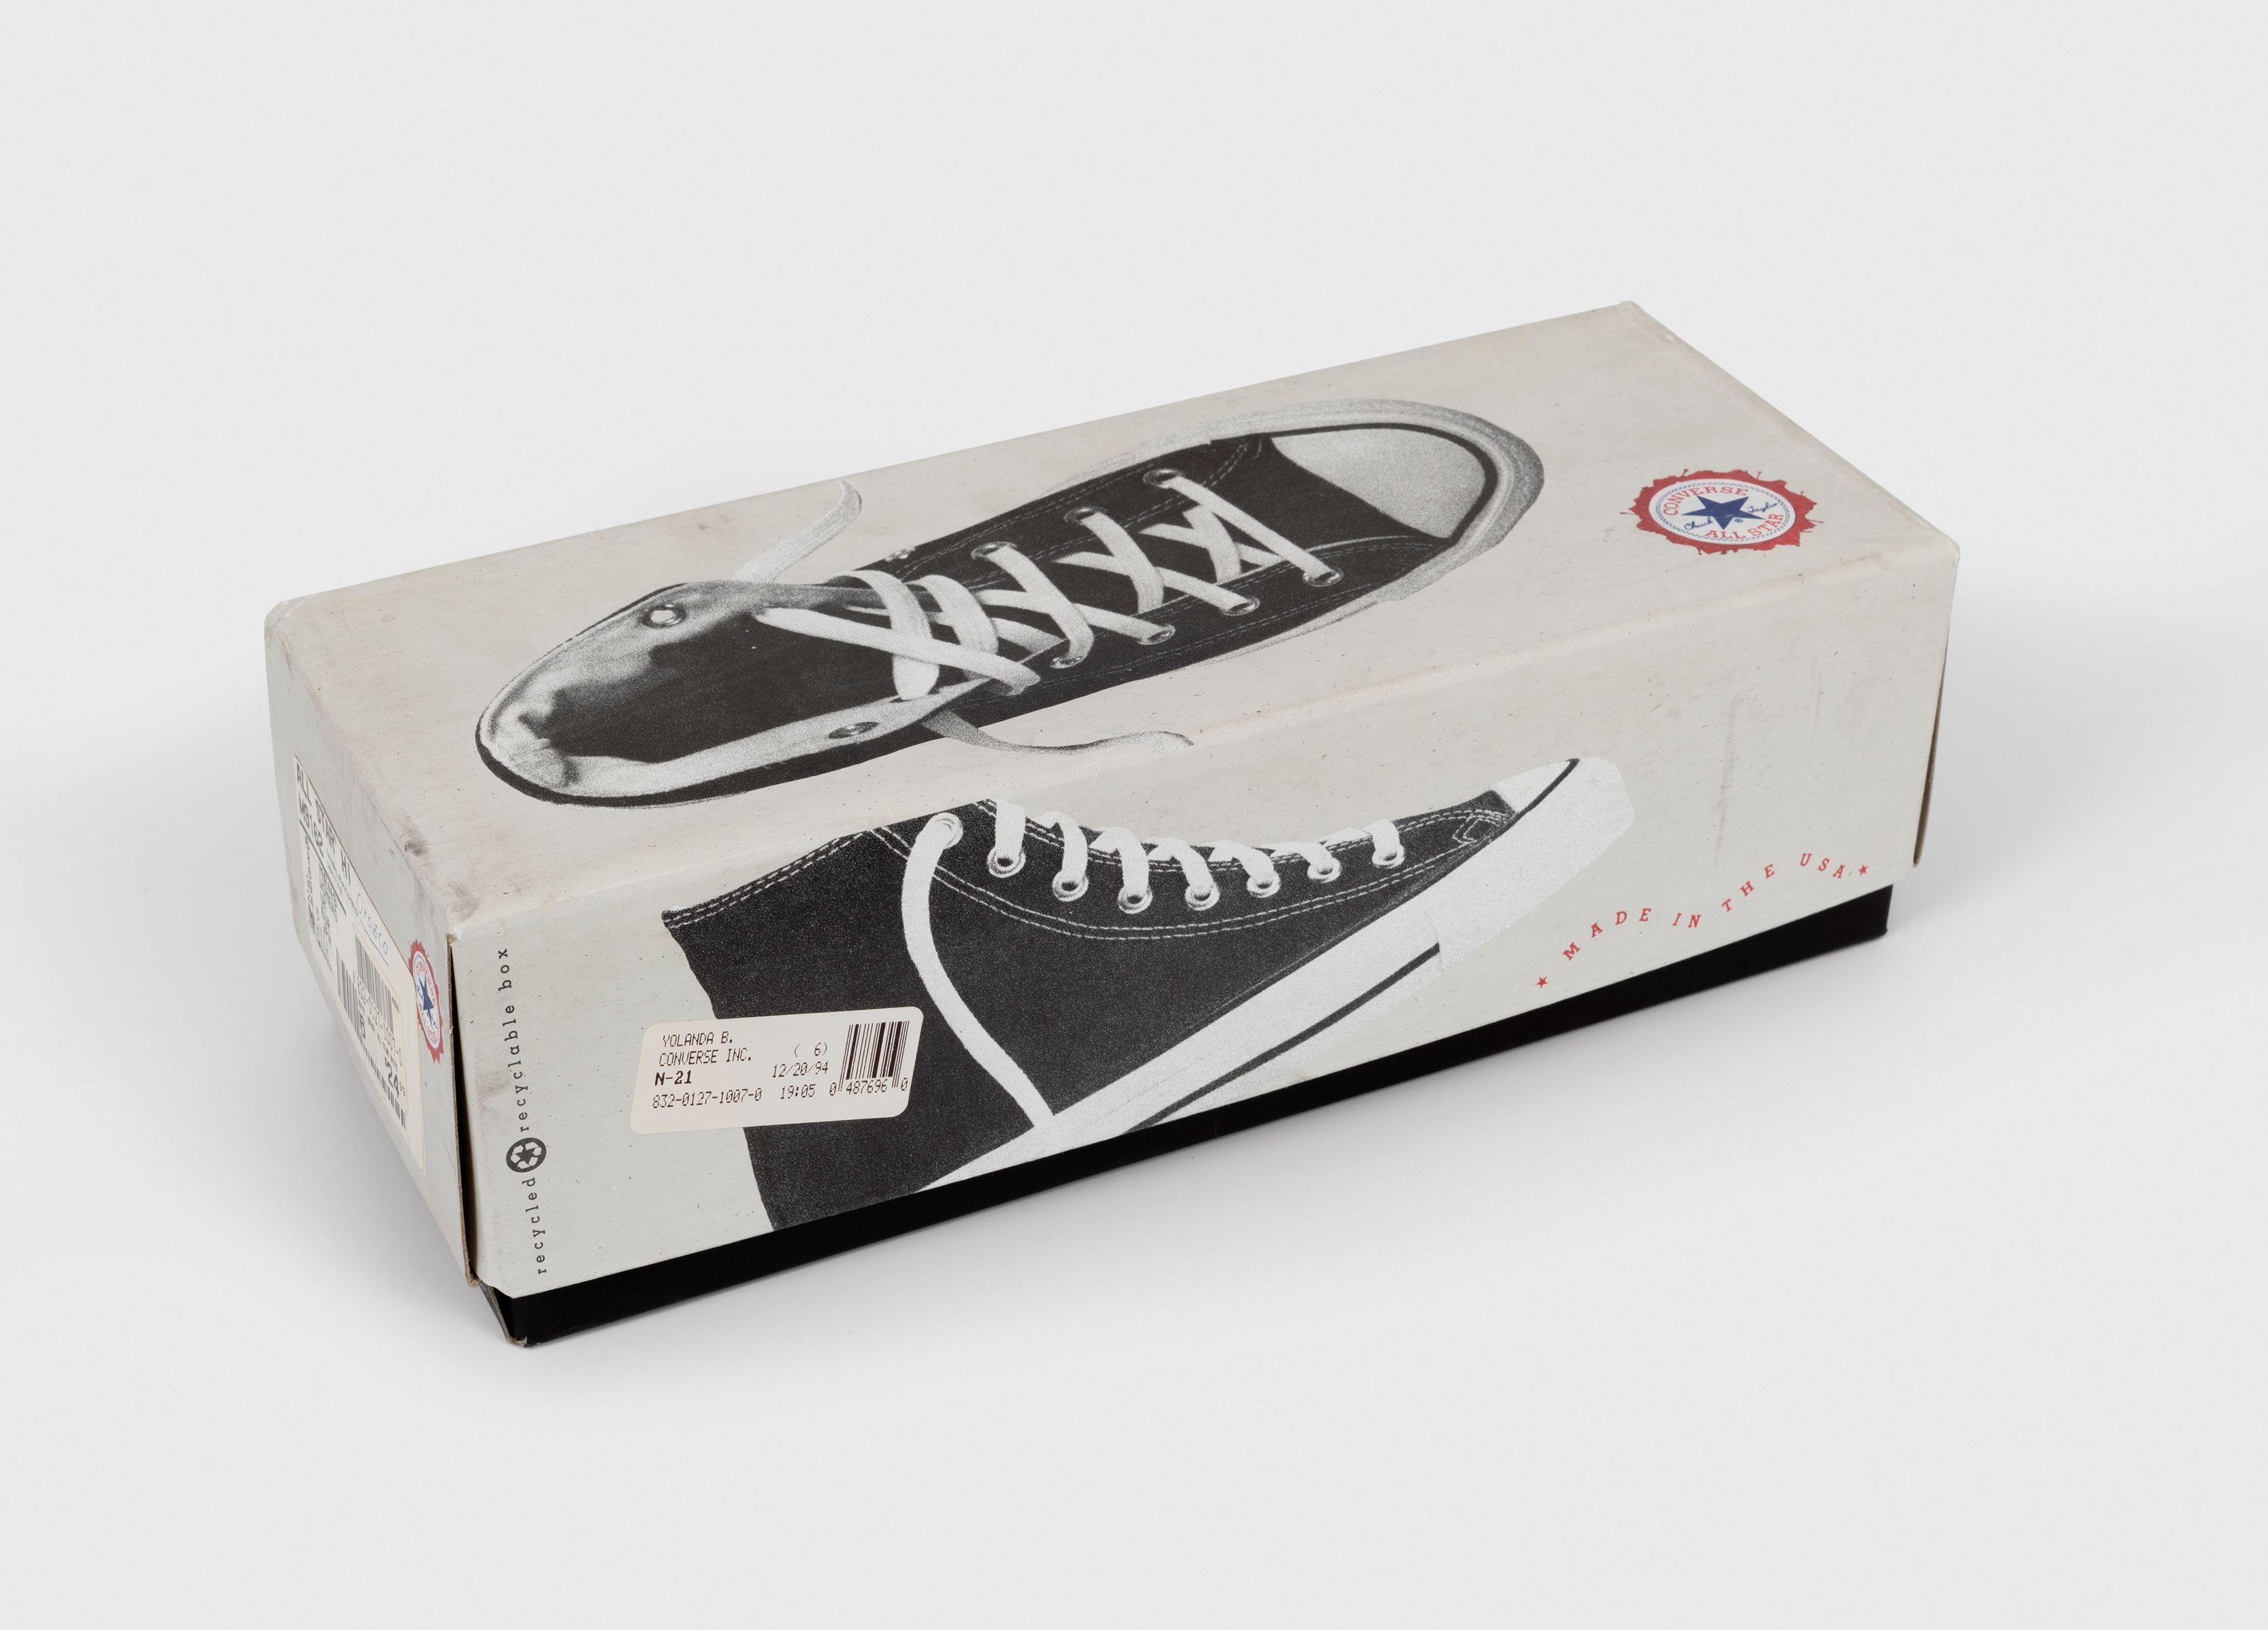 Model (Converse Shoe Box), from Working Table objects